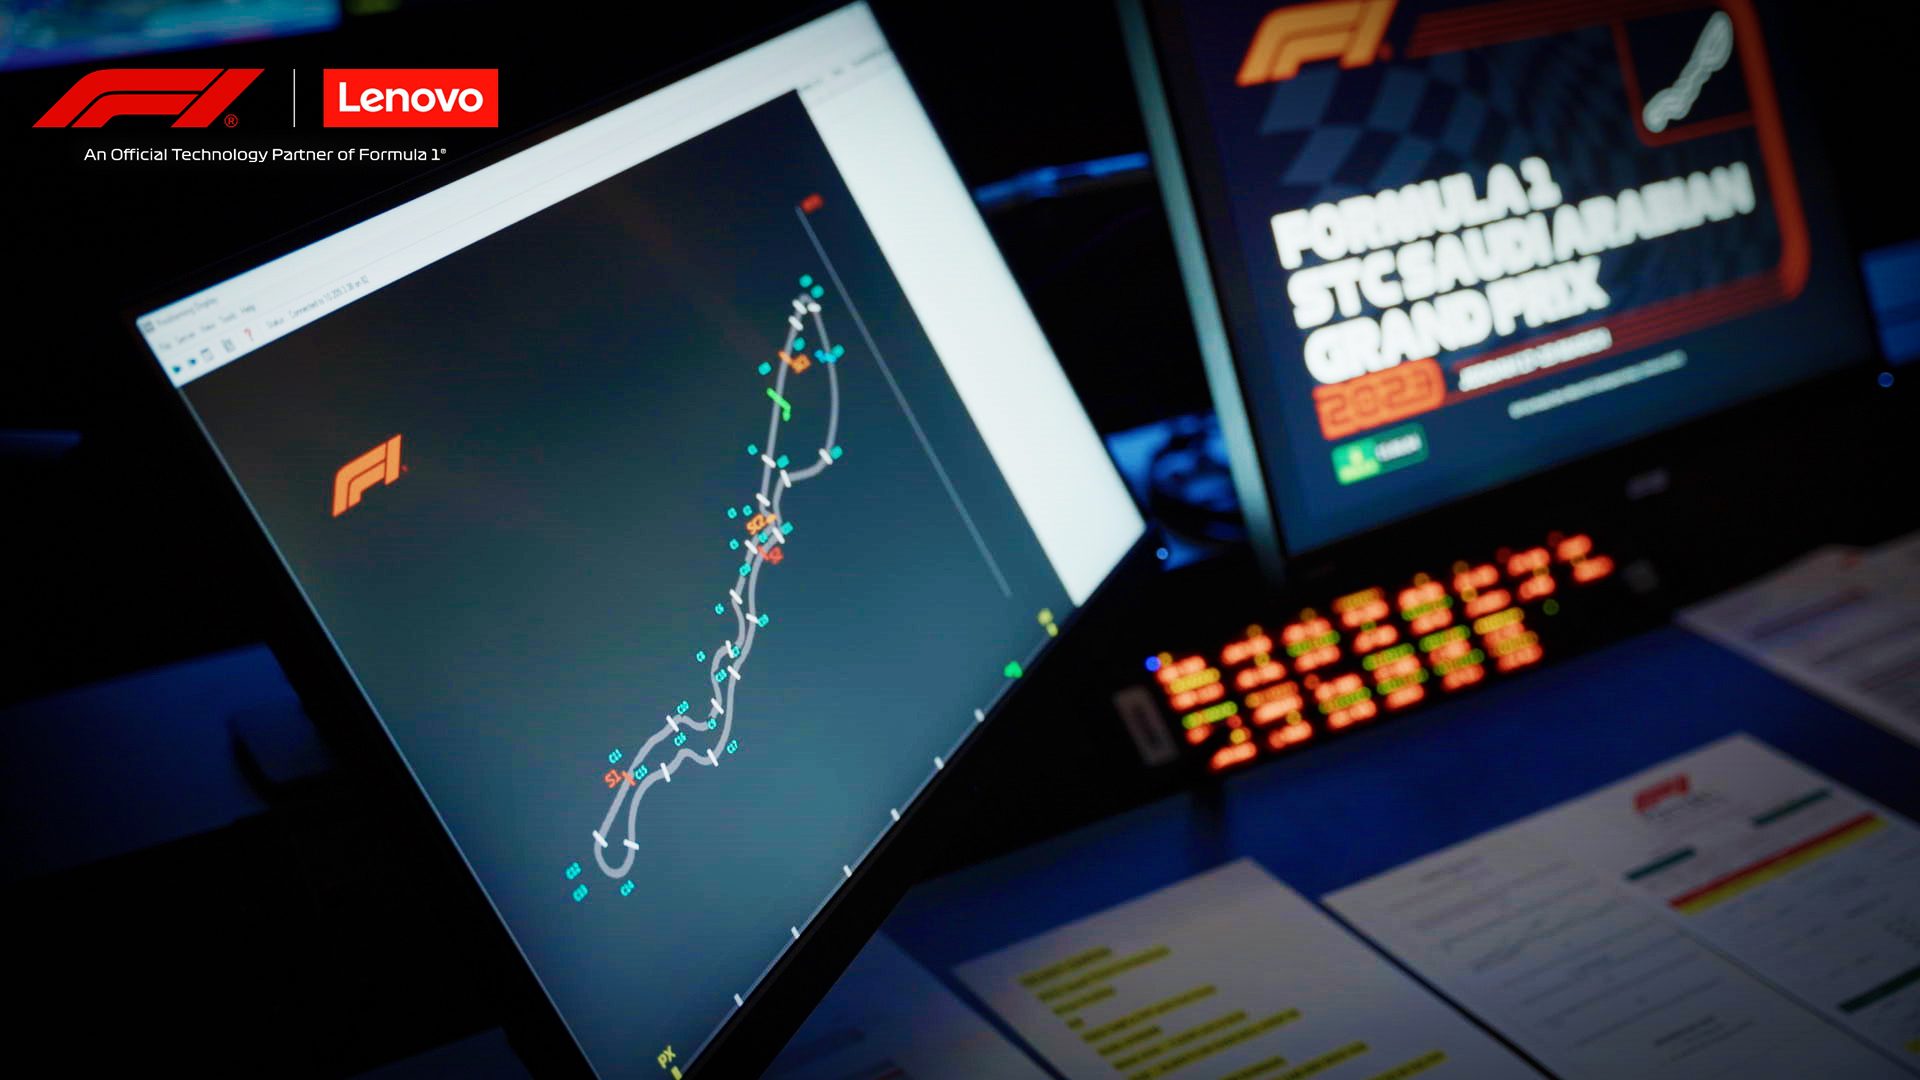 F1 and Lenovo: Data points plotted on a monitor